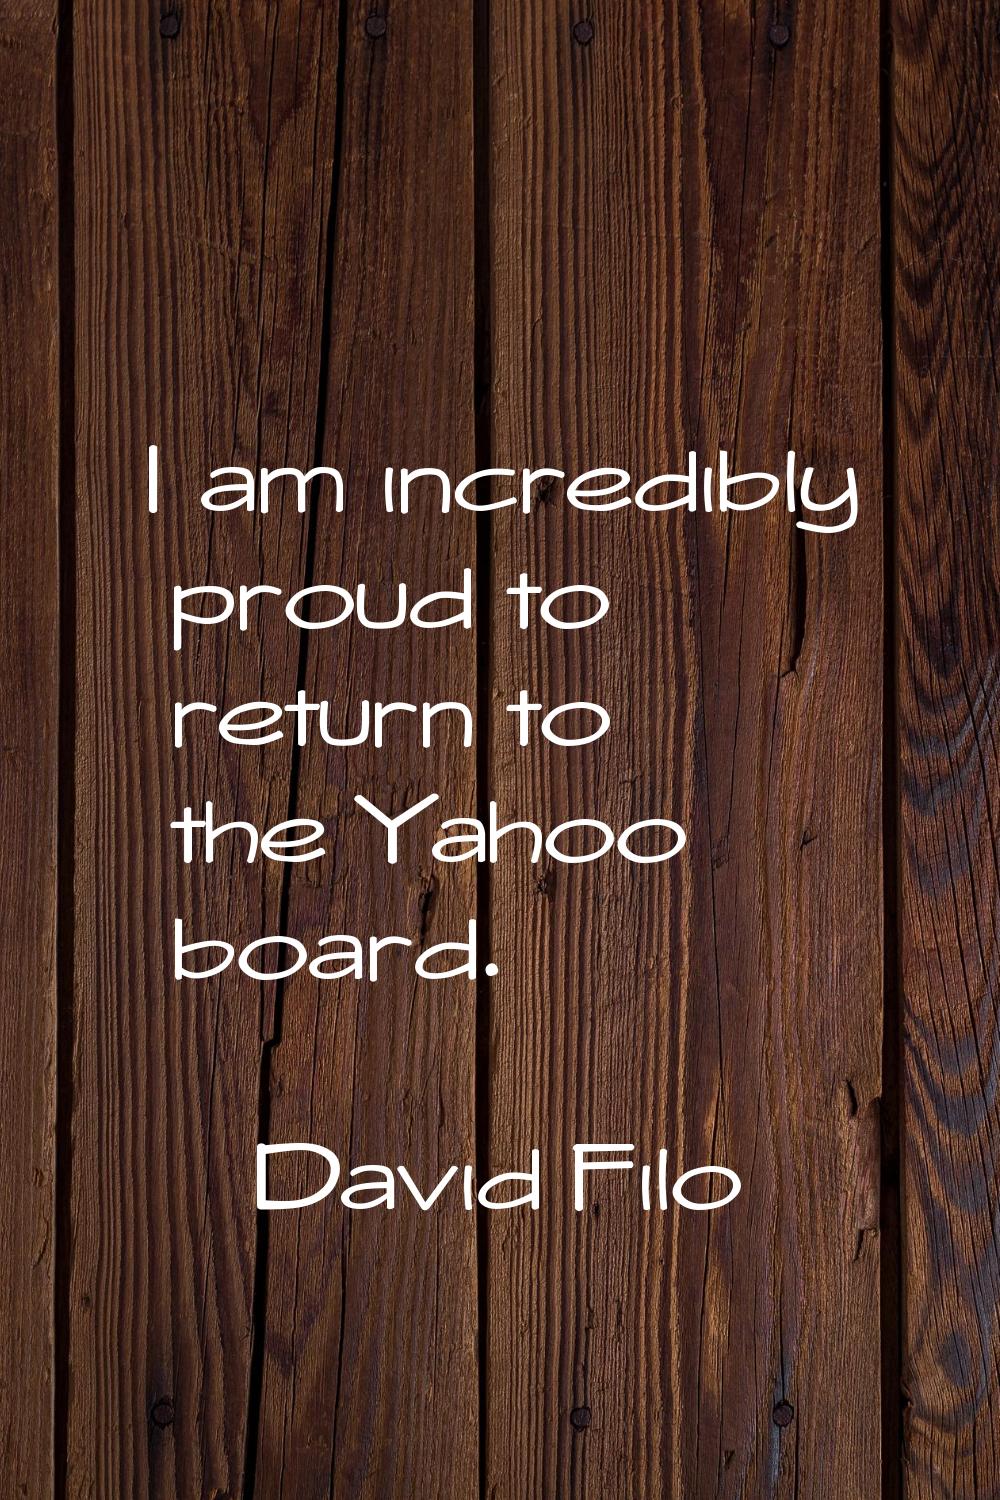 I am incredibly proud to return to the Yahoo board.